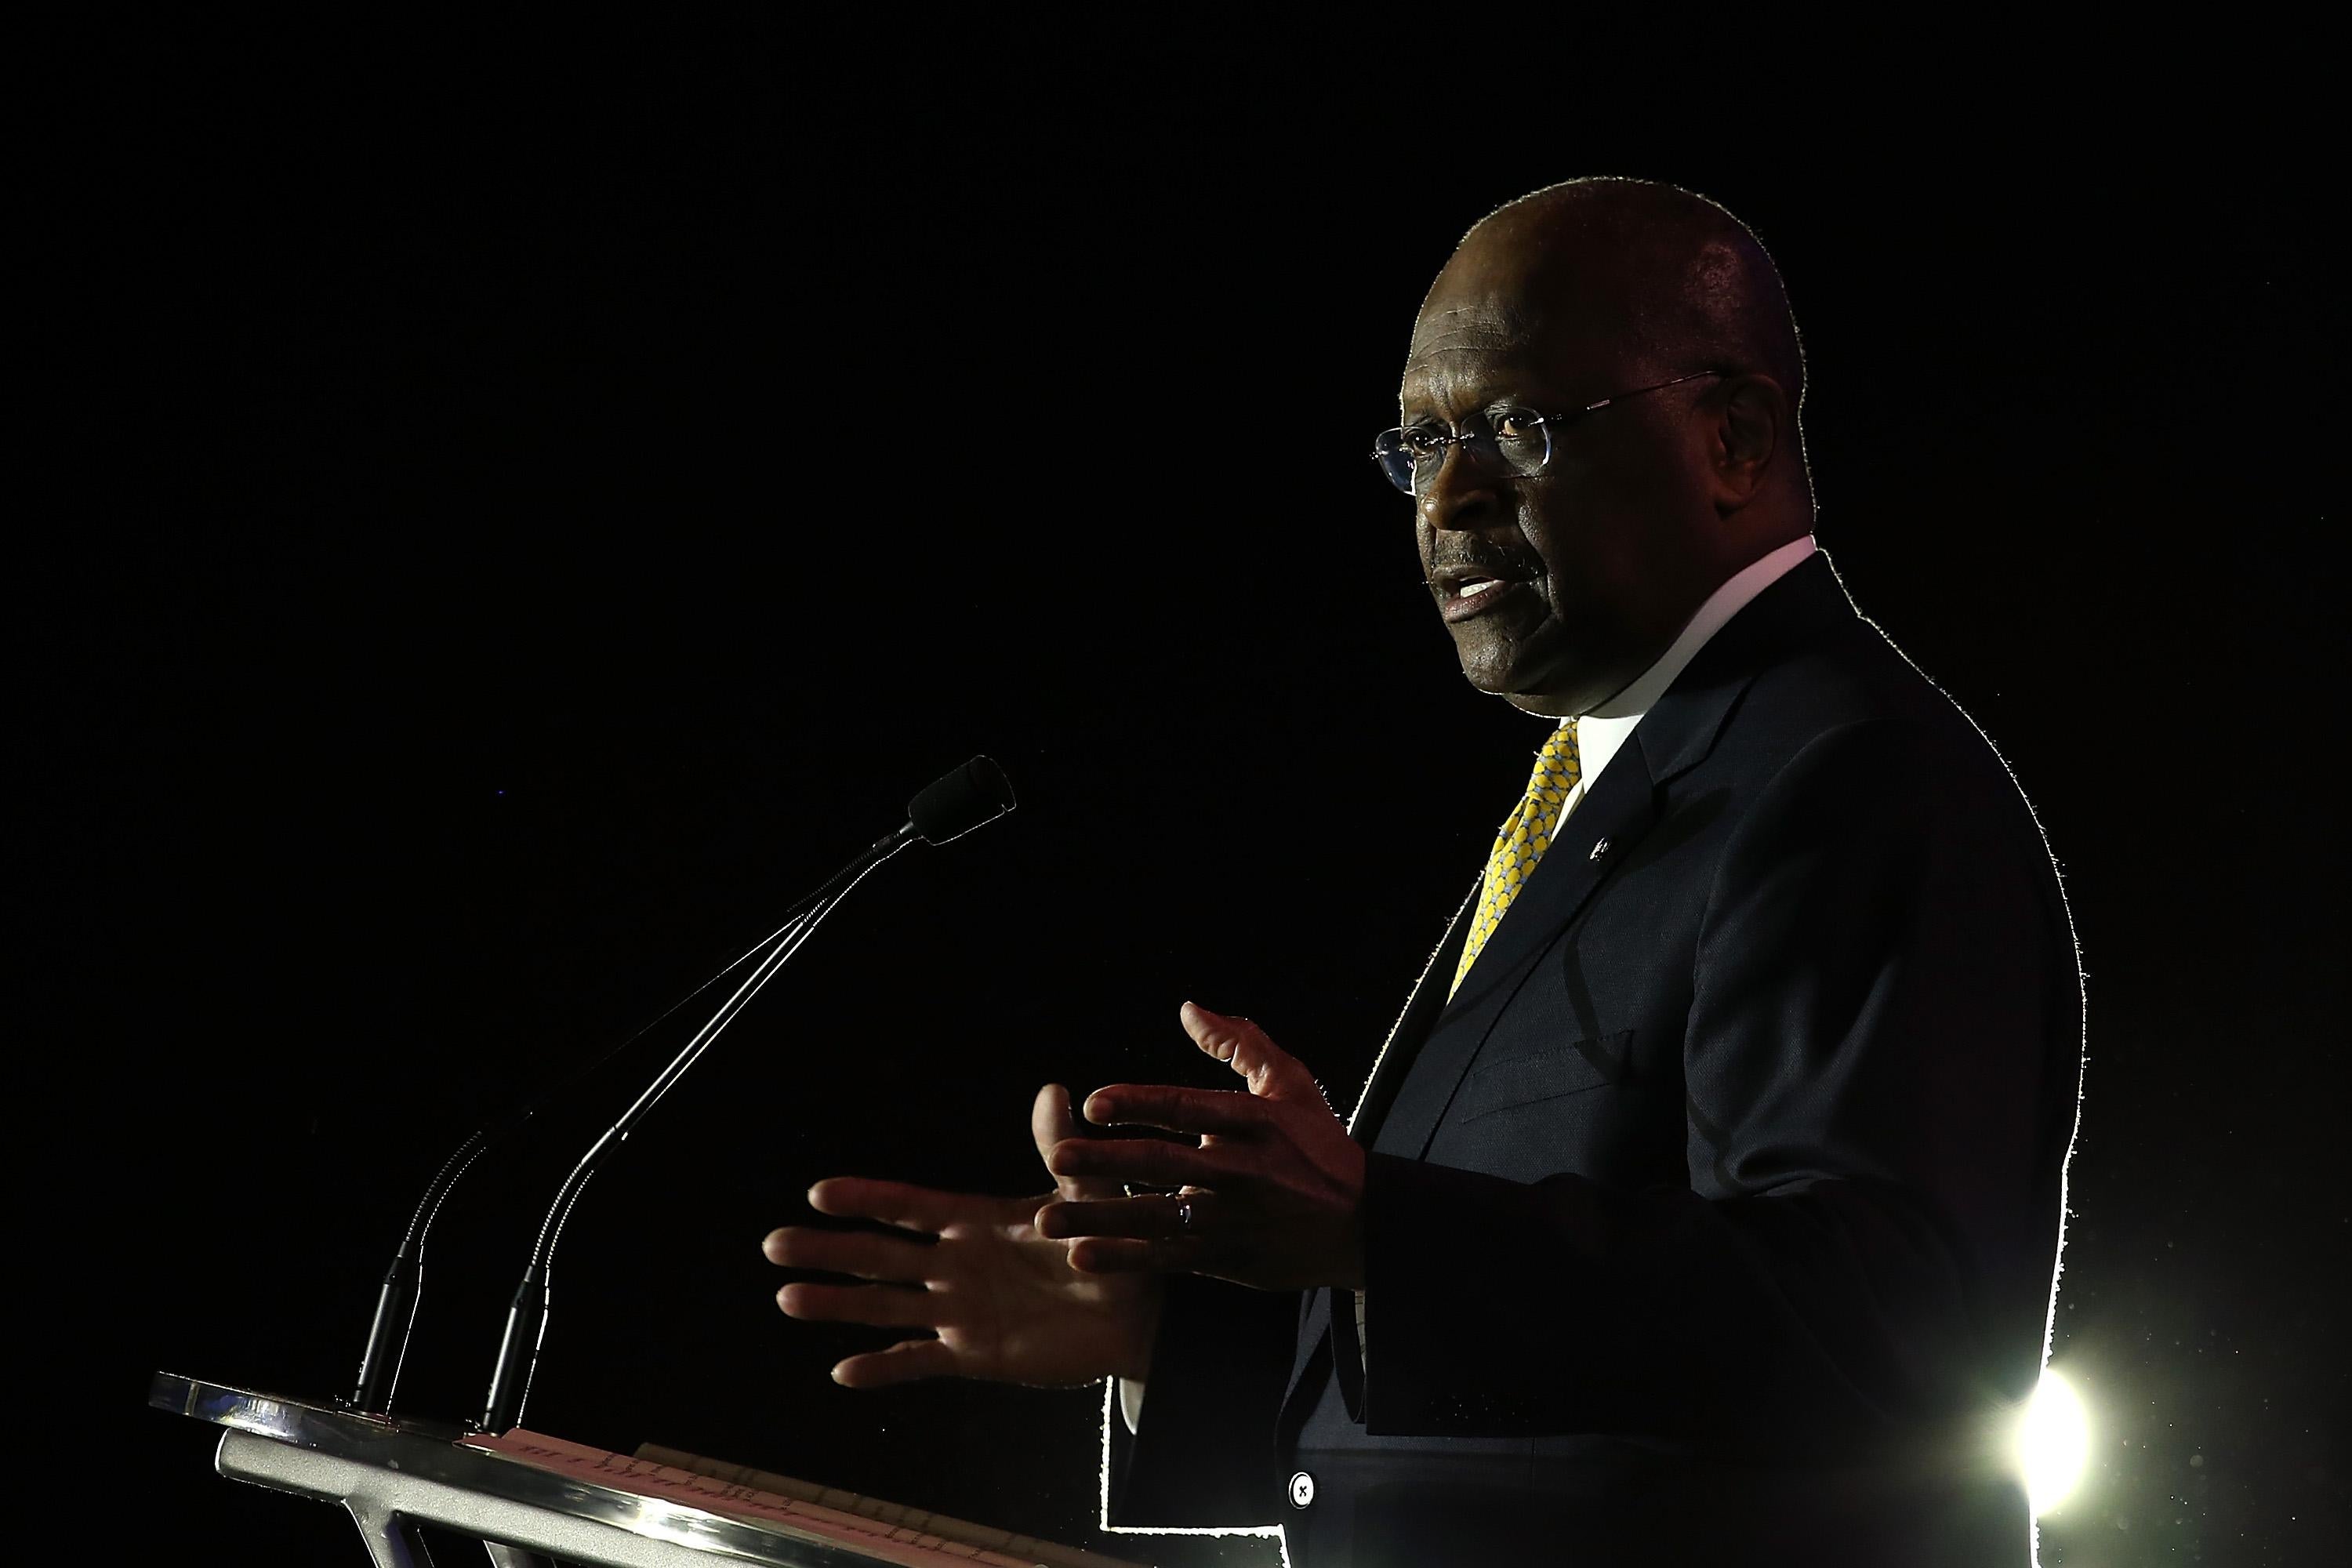 Cain speaks at a podium on a dark stage